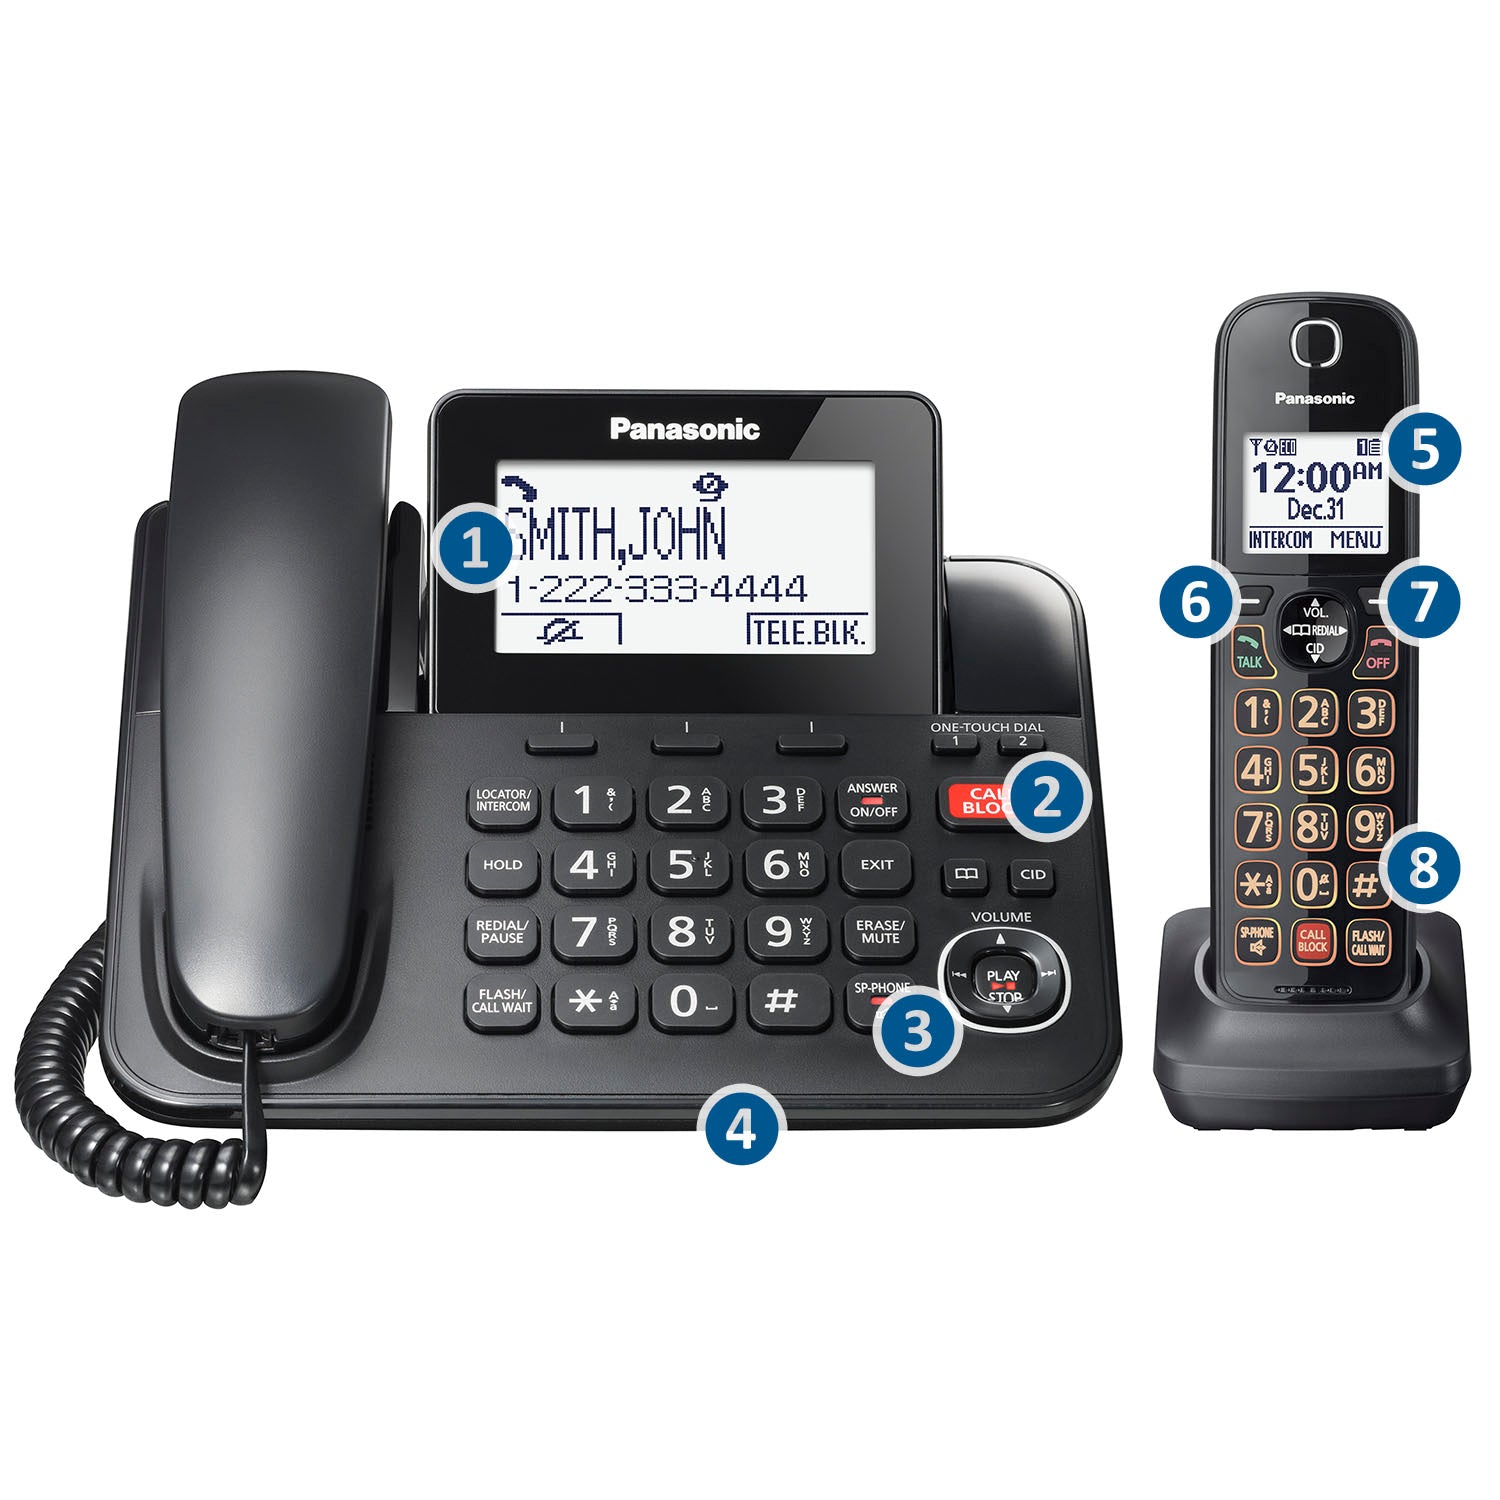 Cordless Phone Accessory Handset for TGF85x Series